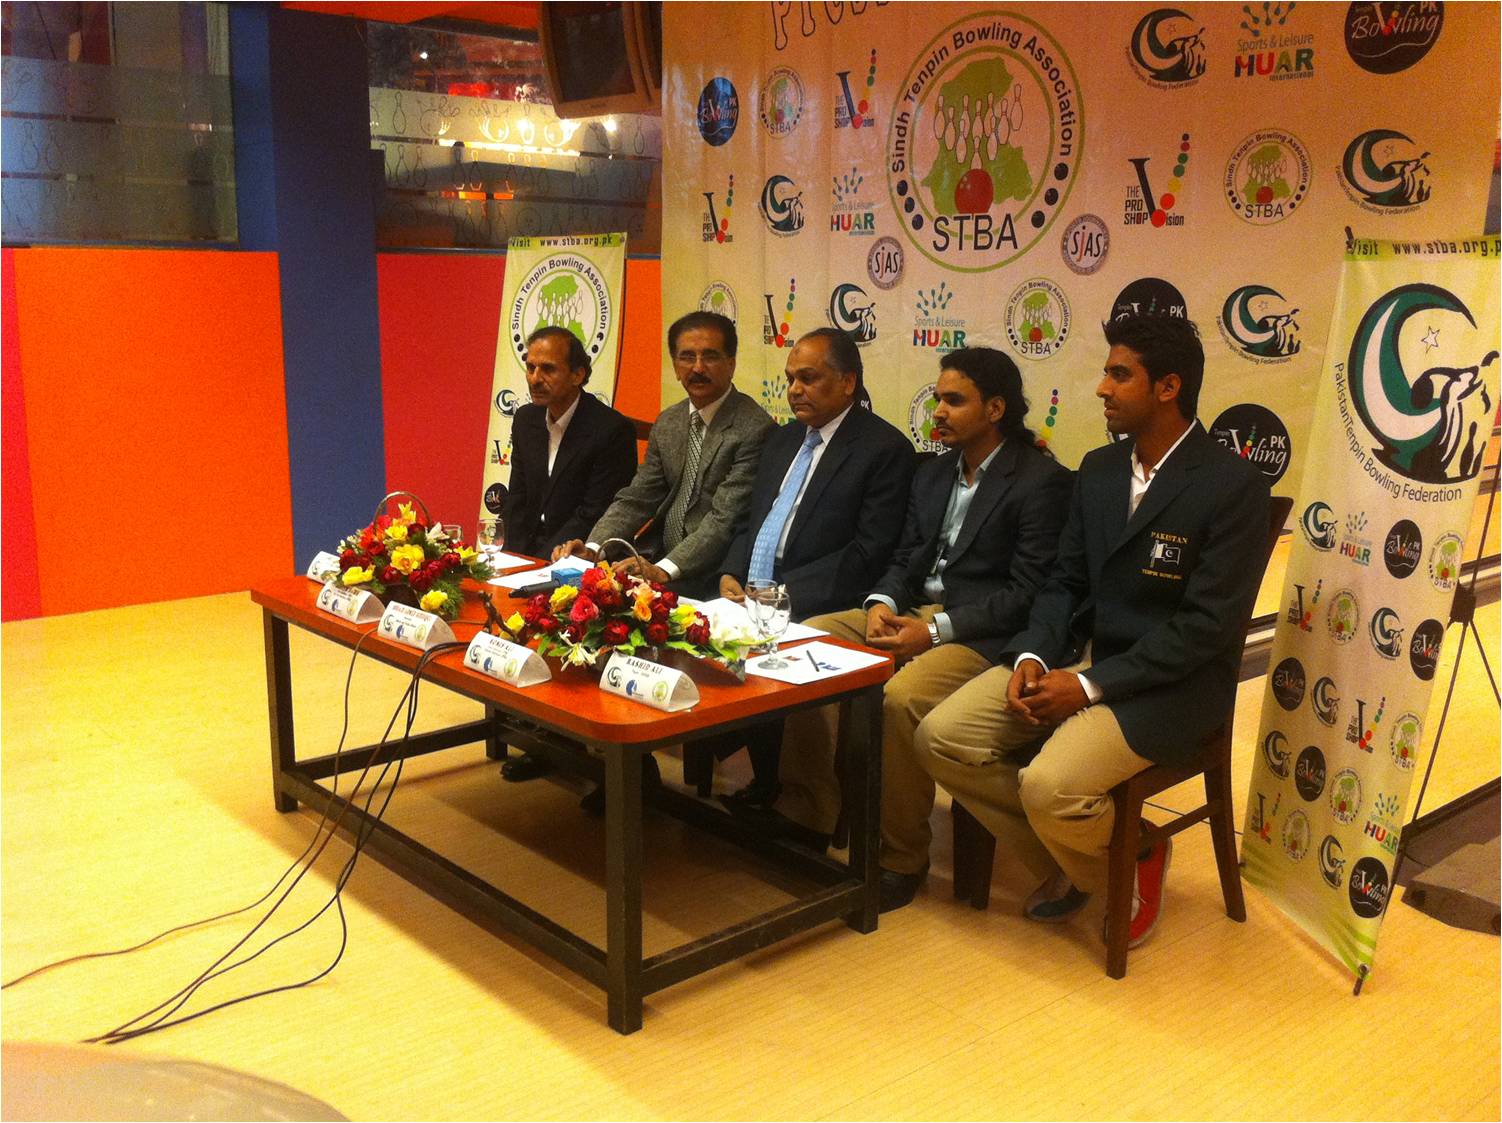 Team Pakistan First time appear in Euro Challenge 2012 Bowling Championship